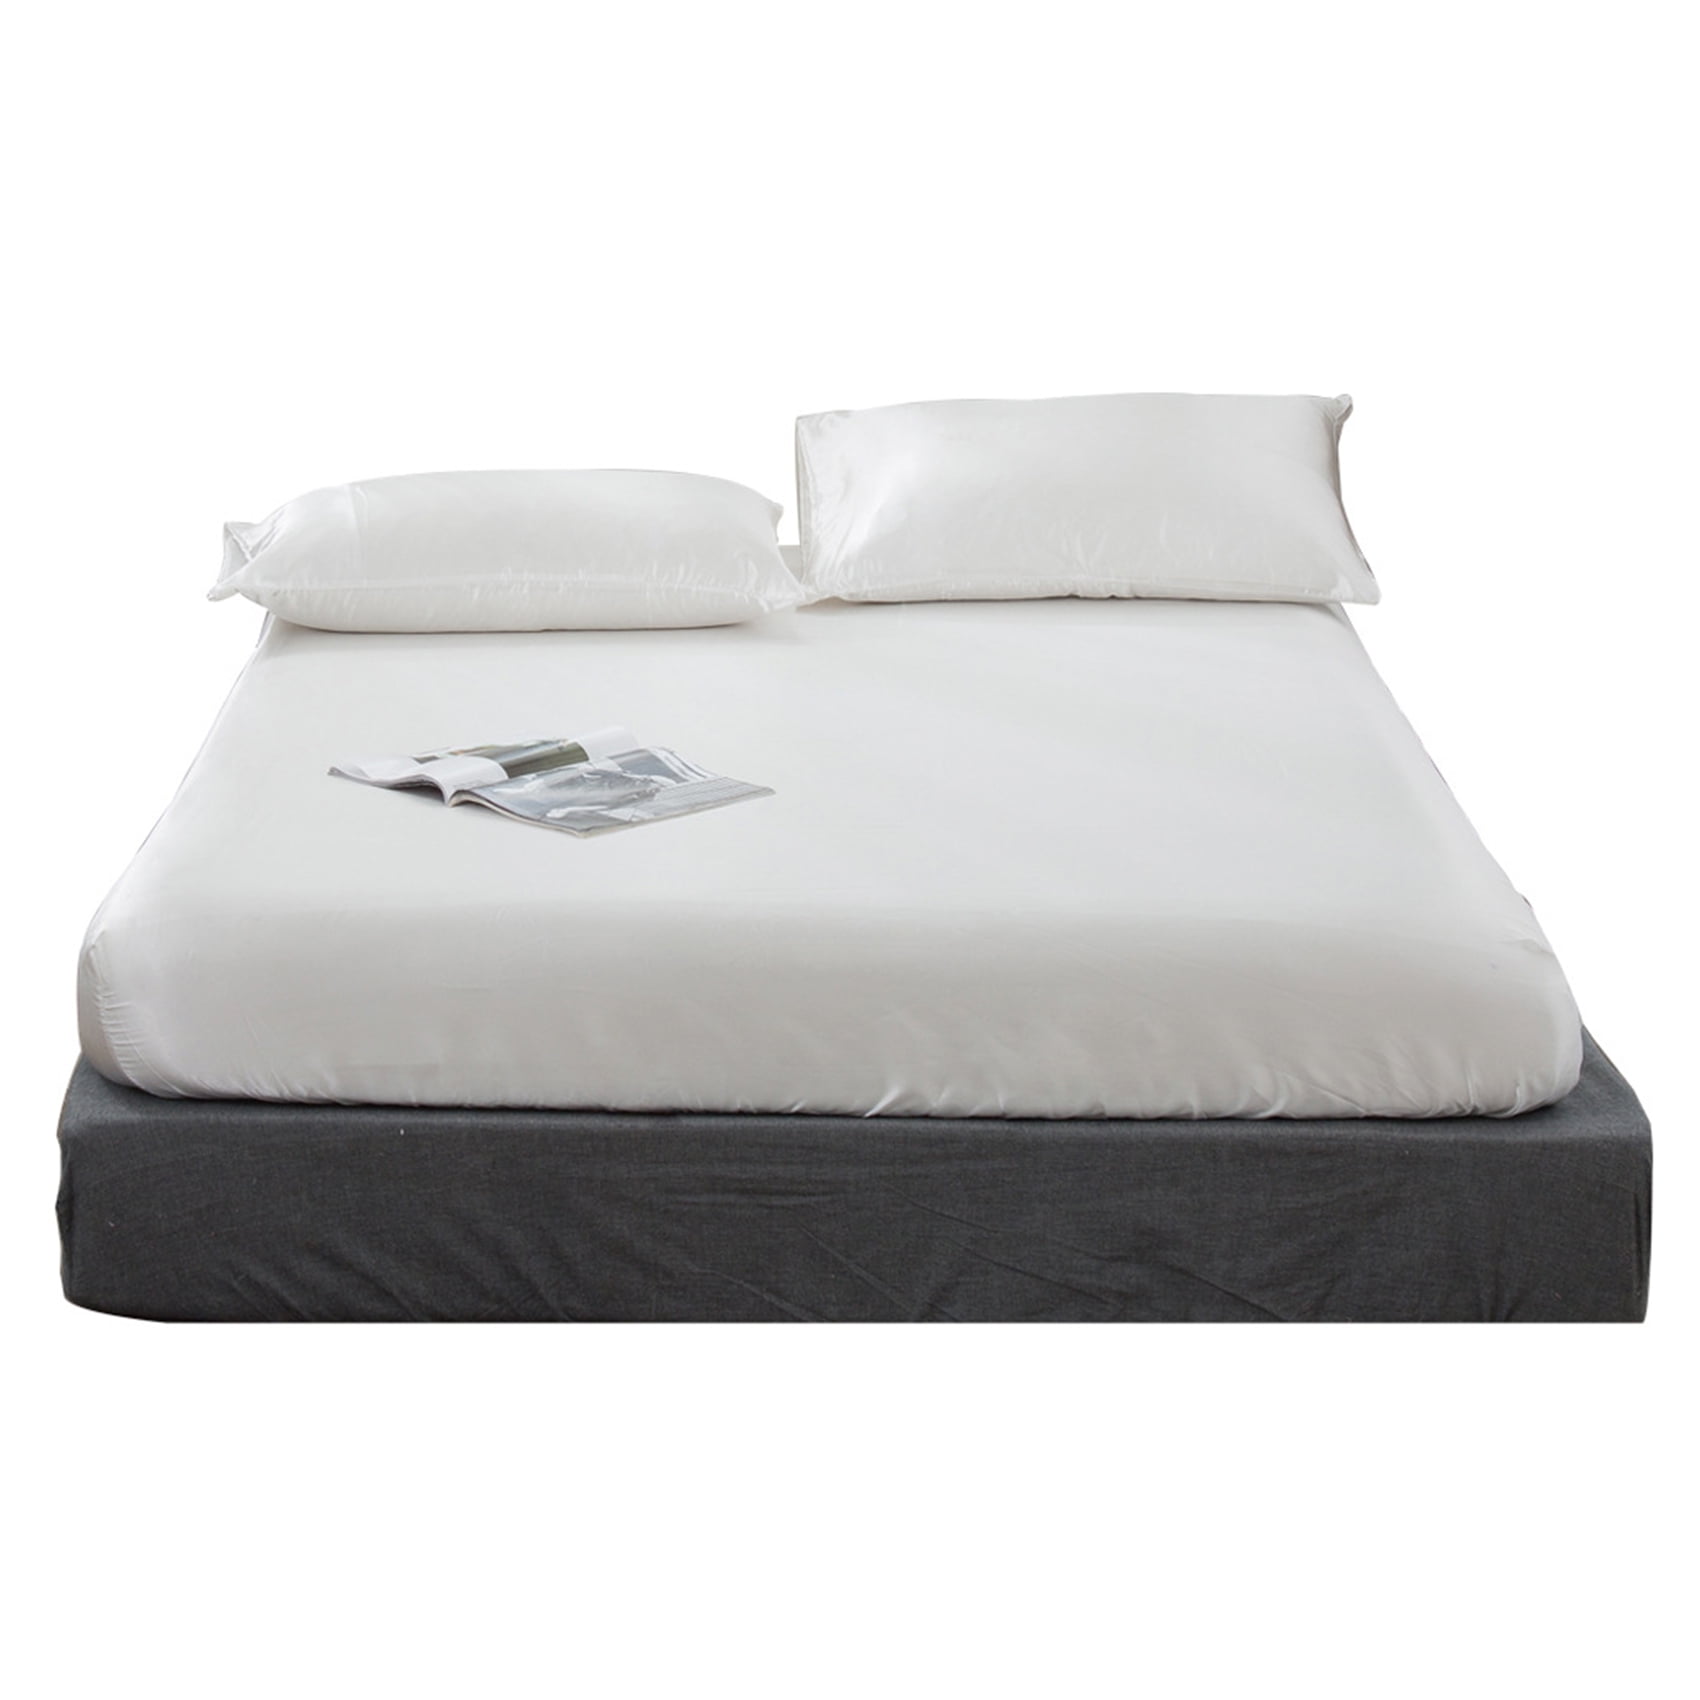 Details about   Waterproof Incontinence Mattress Cover Full Size for a King Size SEE VIDEO 